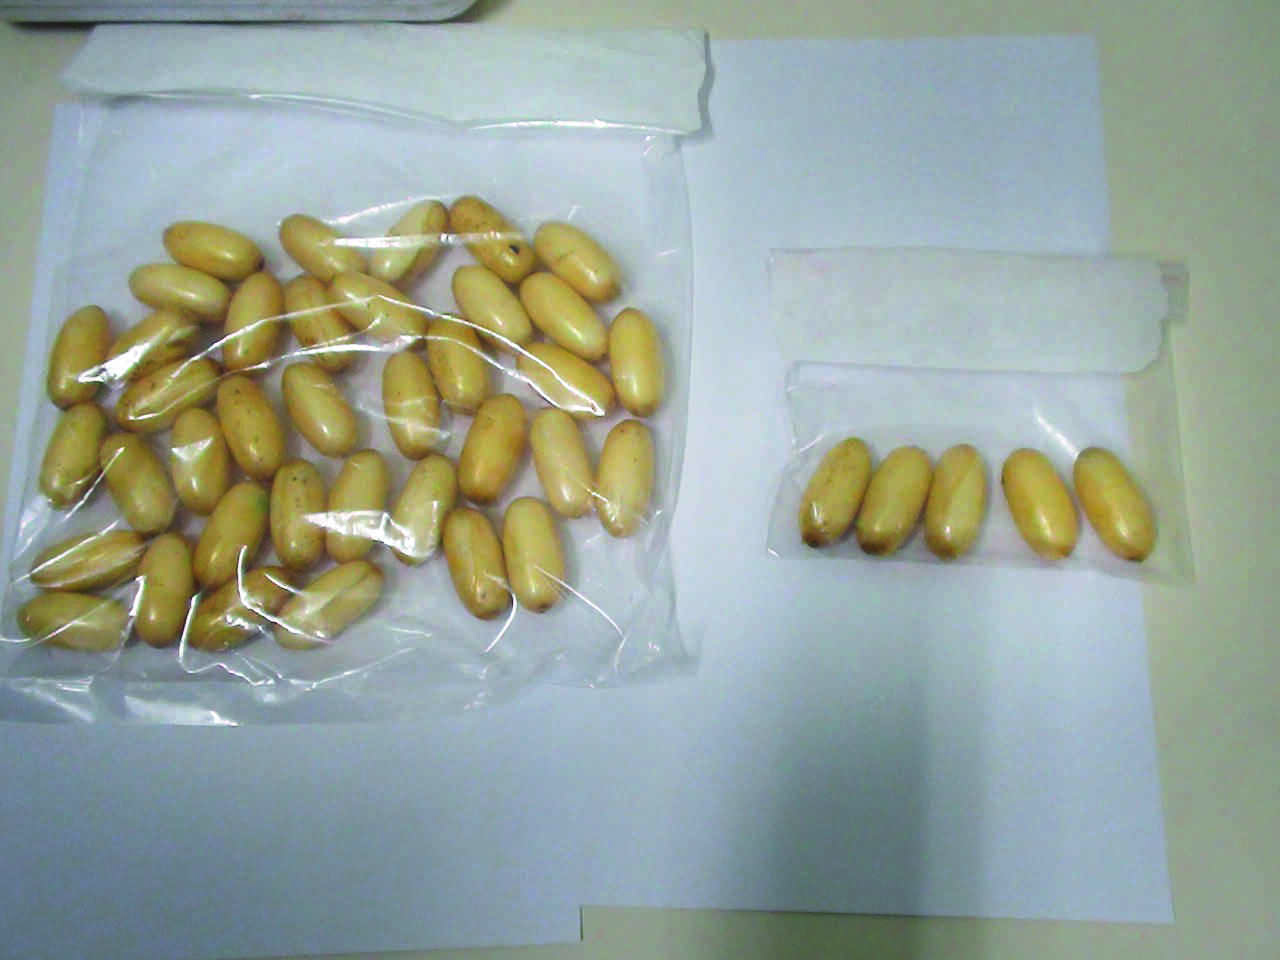 Brazilian native with cocaine capsules in stomach held in city